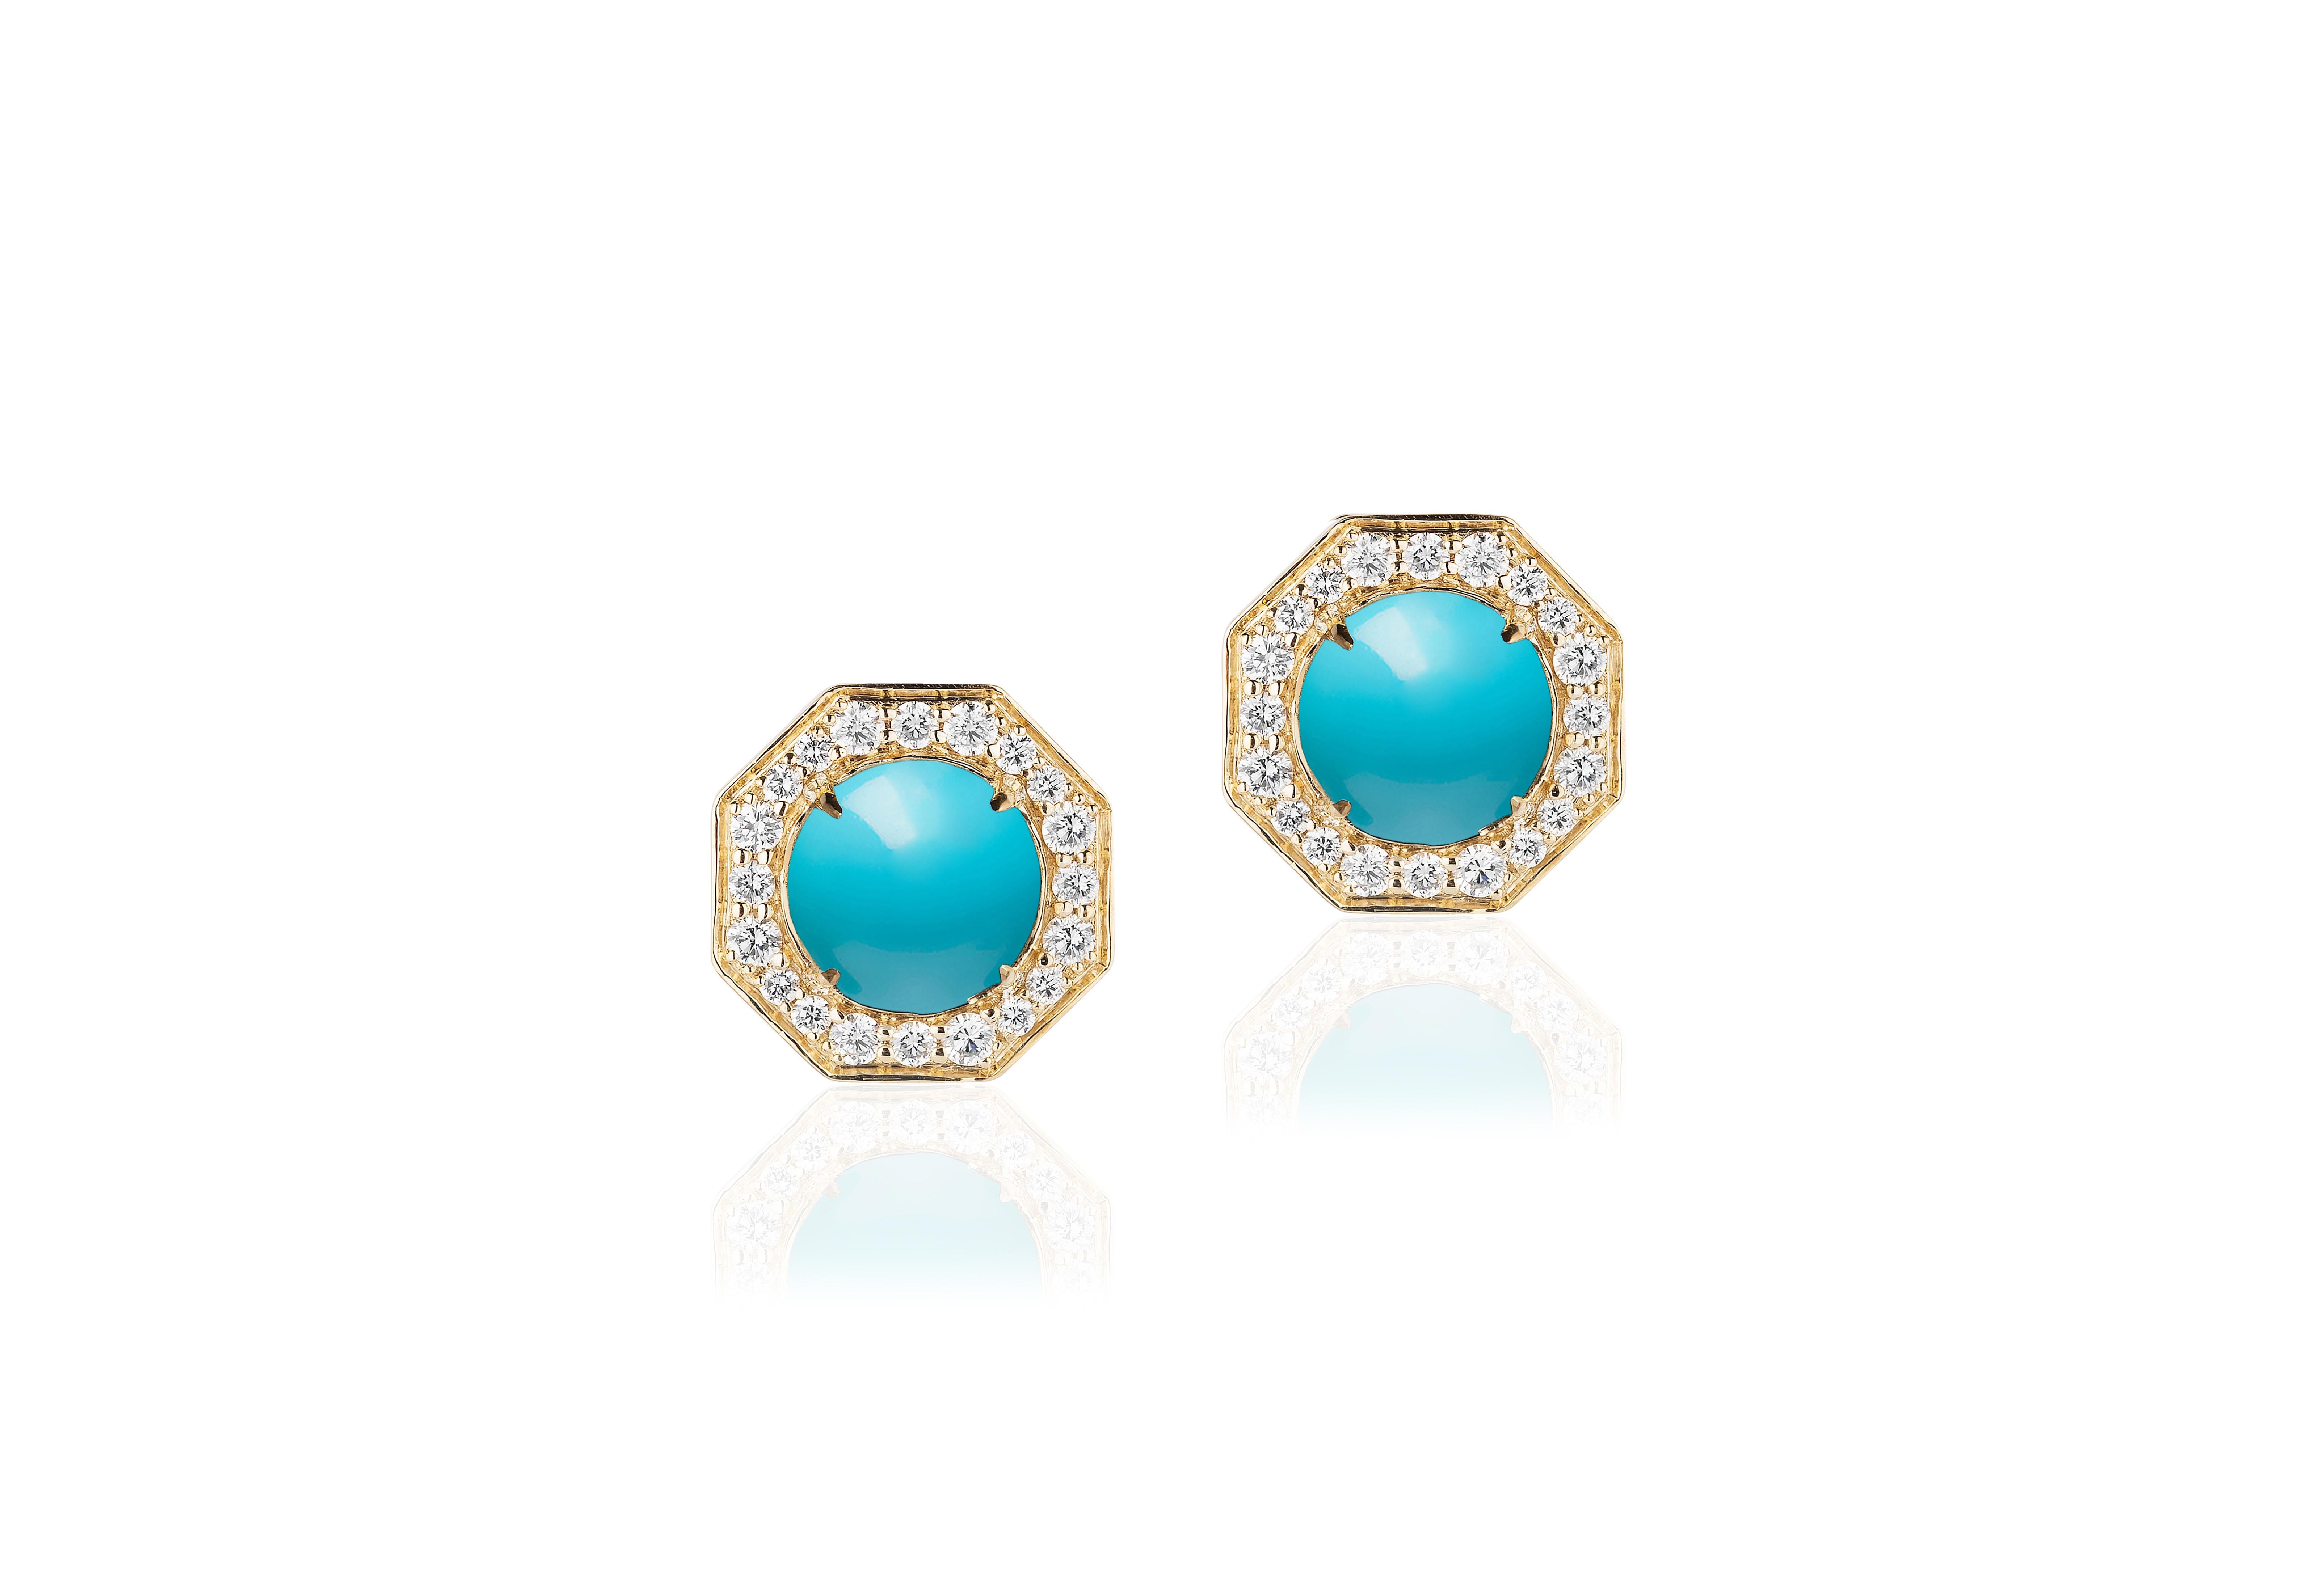 Turquoise Small Pendant with Diamonds in 18k Yellow Gold, from 'Rock N Roll' Collection

Stone Size: 8 mm 

Gemstone Weight:  Turquoise- 1.26 Carats

Diamond: G-H / VS, Approx Wt: 0.36 Carats

Turquoise Stud Earrings with Diamonds in 18k Yellow